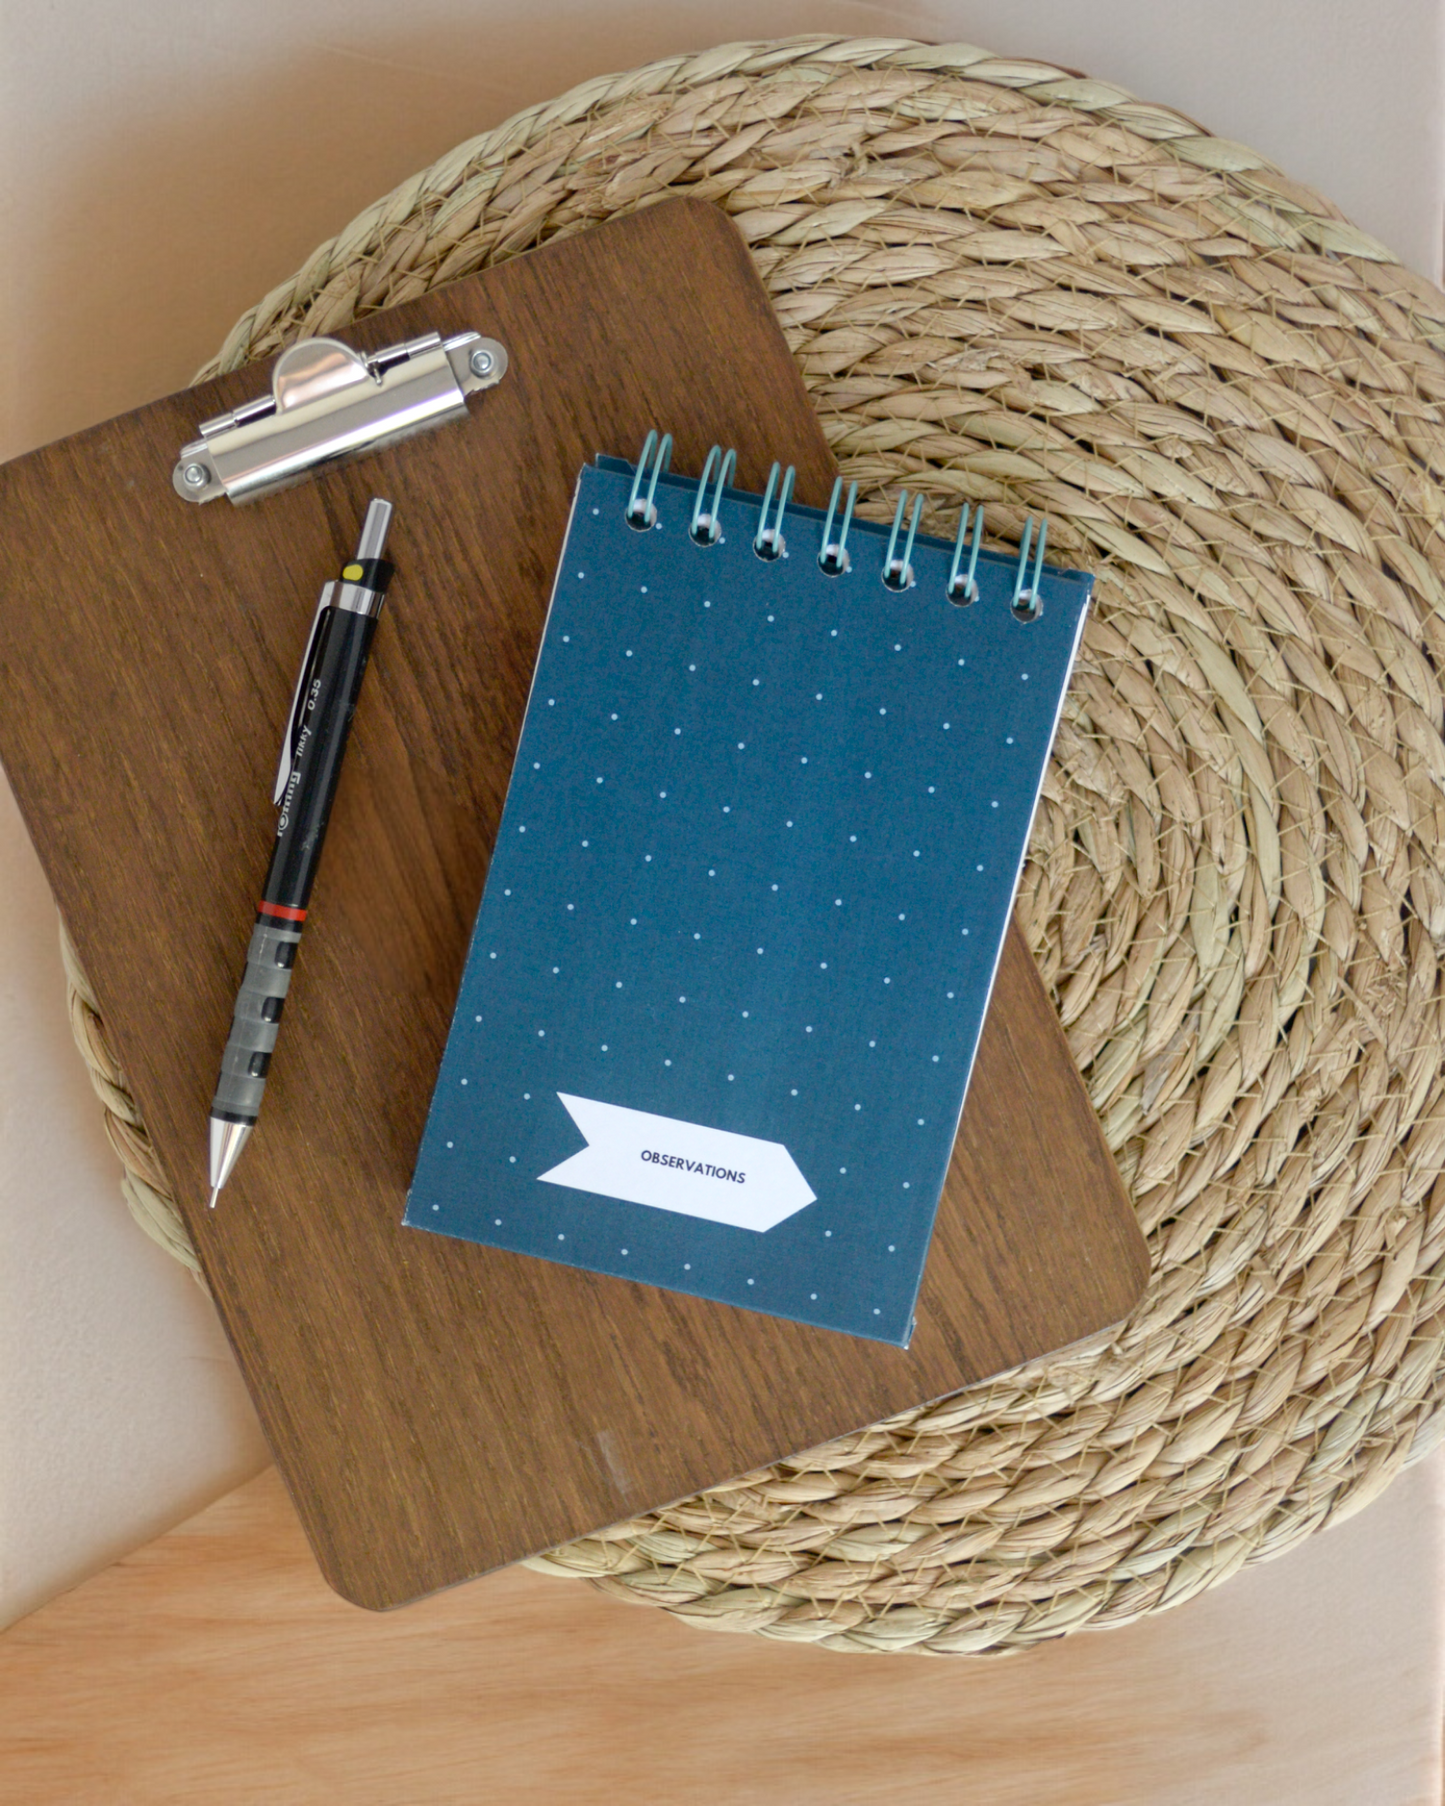 Observations, recycled mini jotter